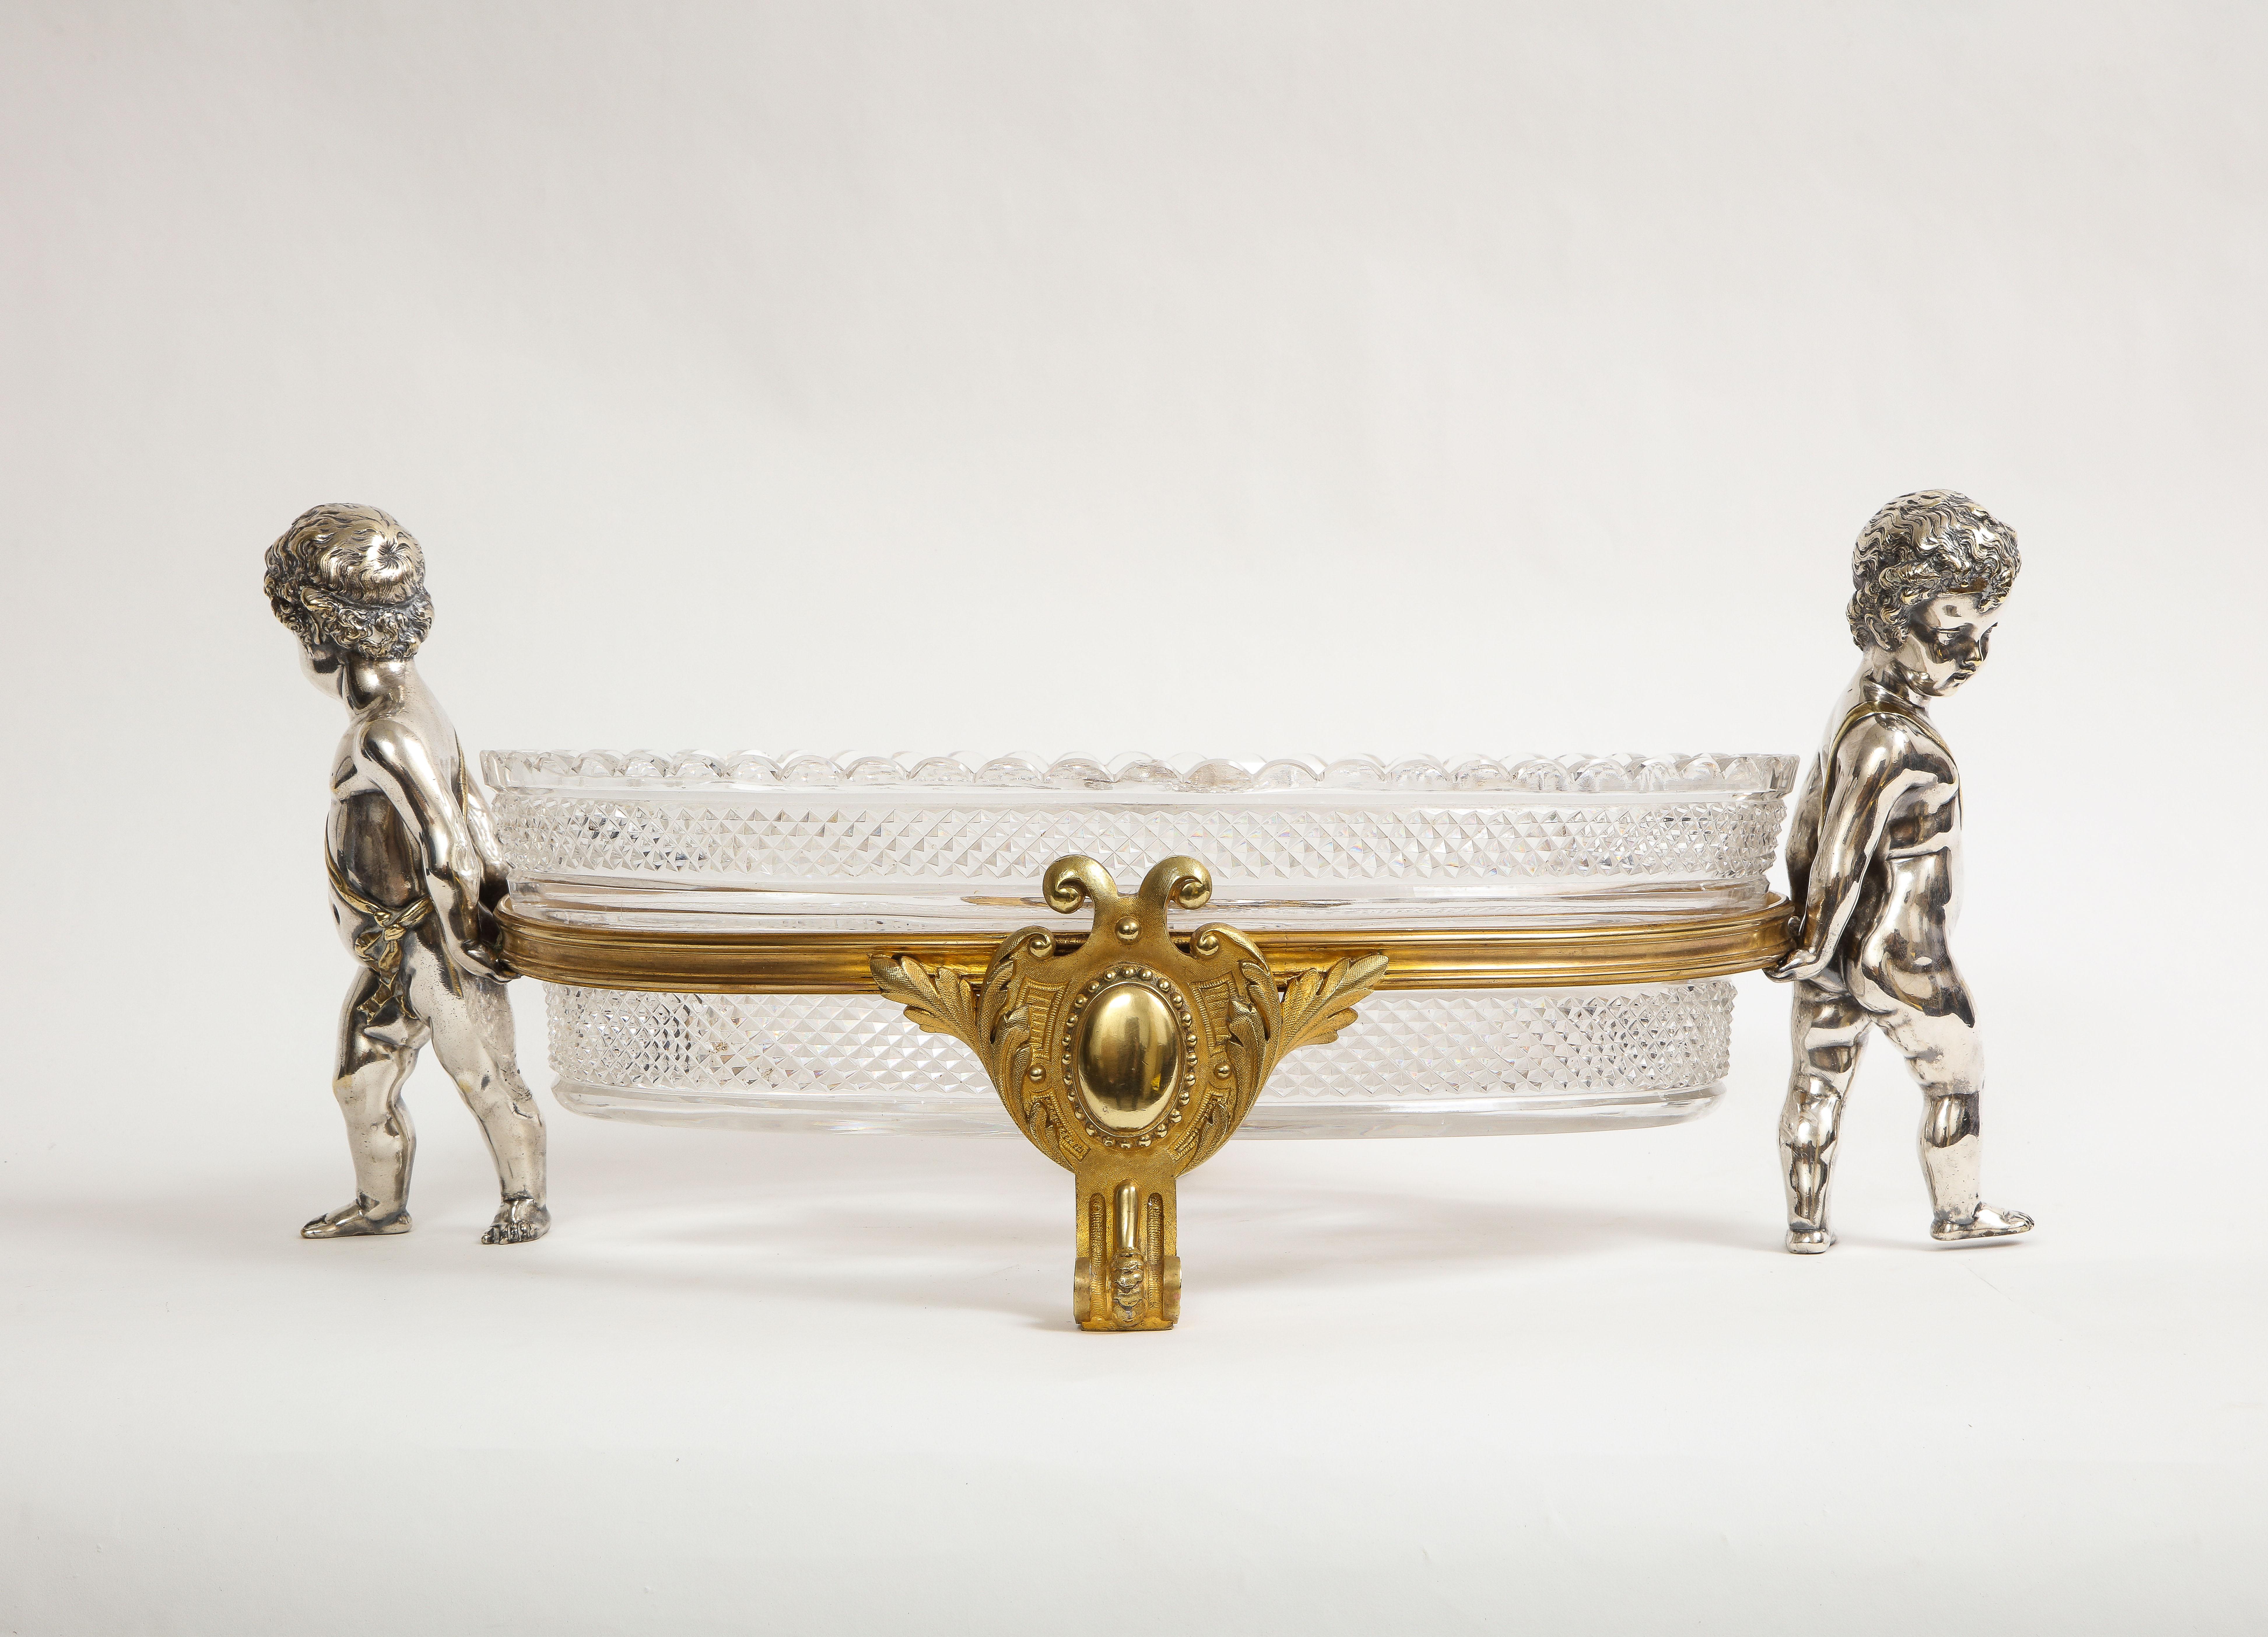 A large Louis XVI Style French Silvered and Gilt Bronze Putti Mounted crystal centerpiece, Marked Baccarat, from the 1800s. The crystal centerpiece is being held up by two silvered bronze putti's which are seen wearing bands around their bodies and